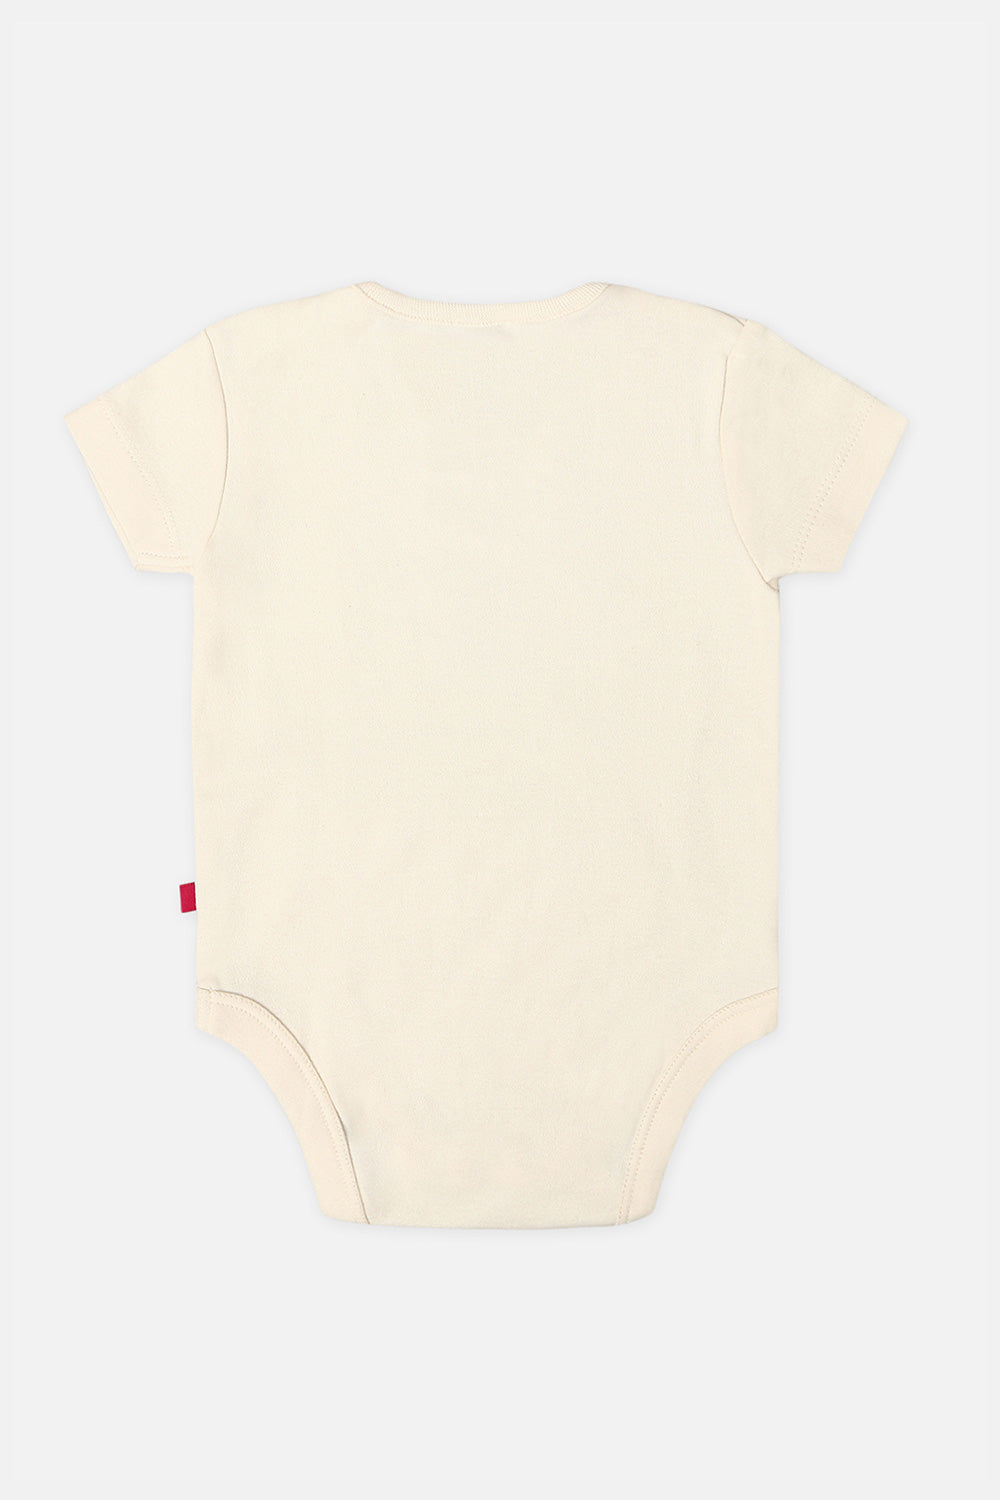 Oh Baby Onesies Shoulder Open White-Os06